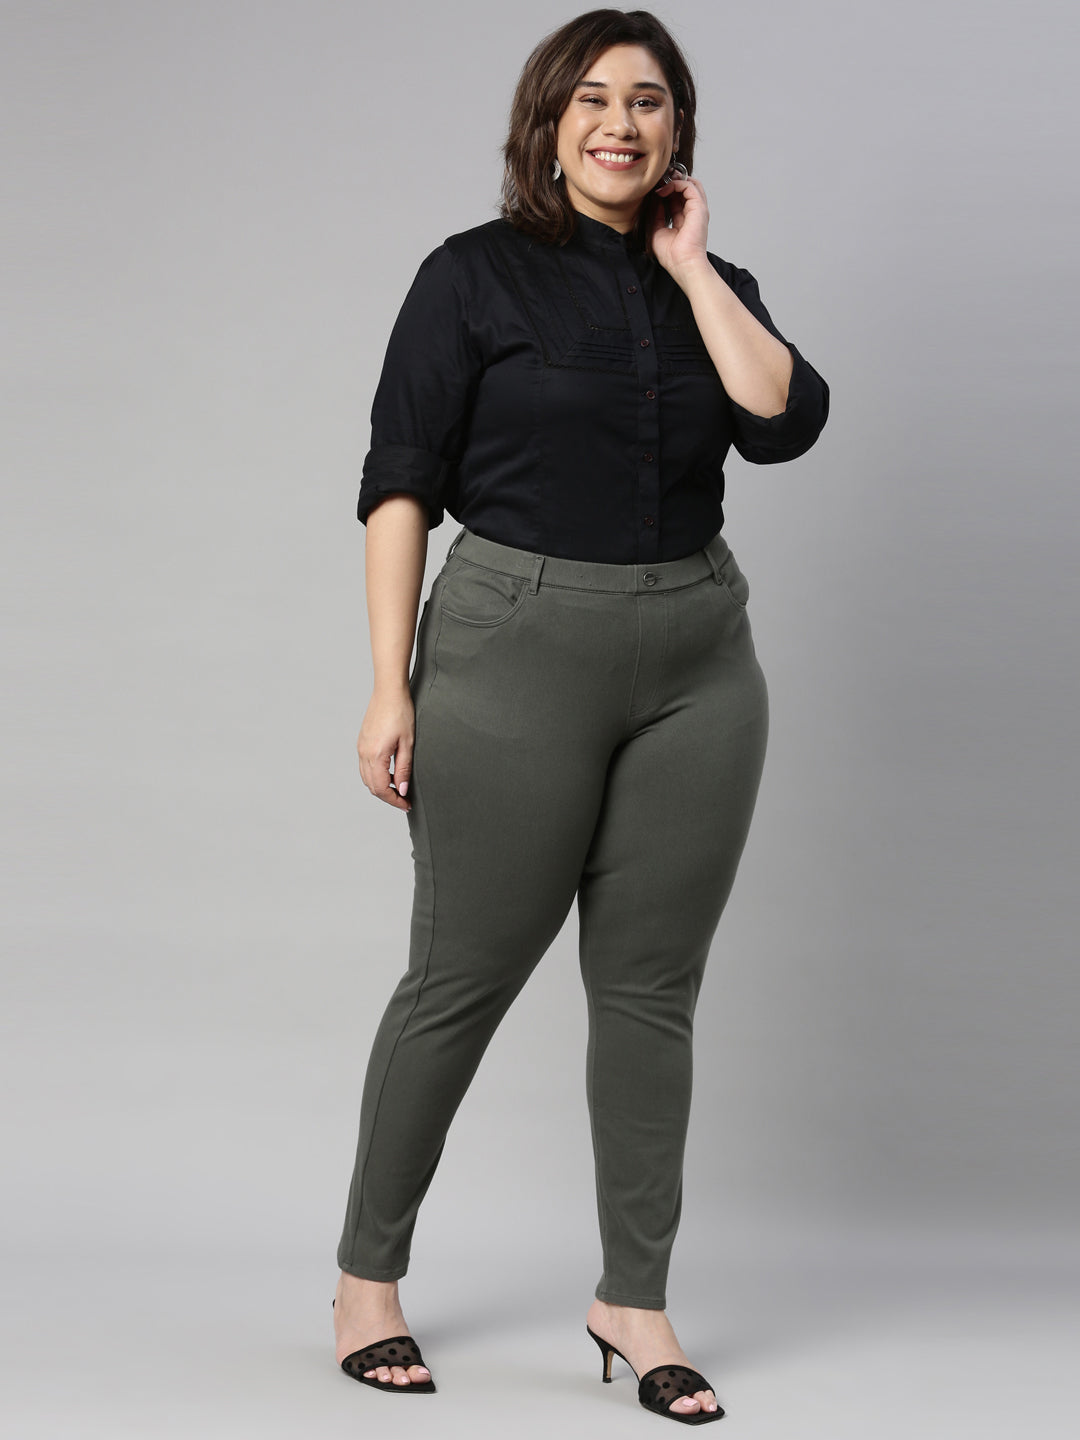 Shop Solid Jeggings with Elastic Waist Online